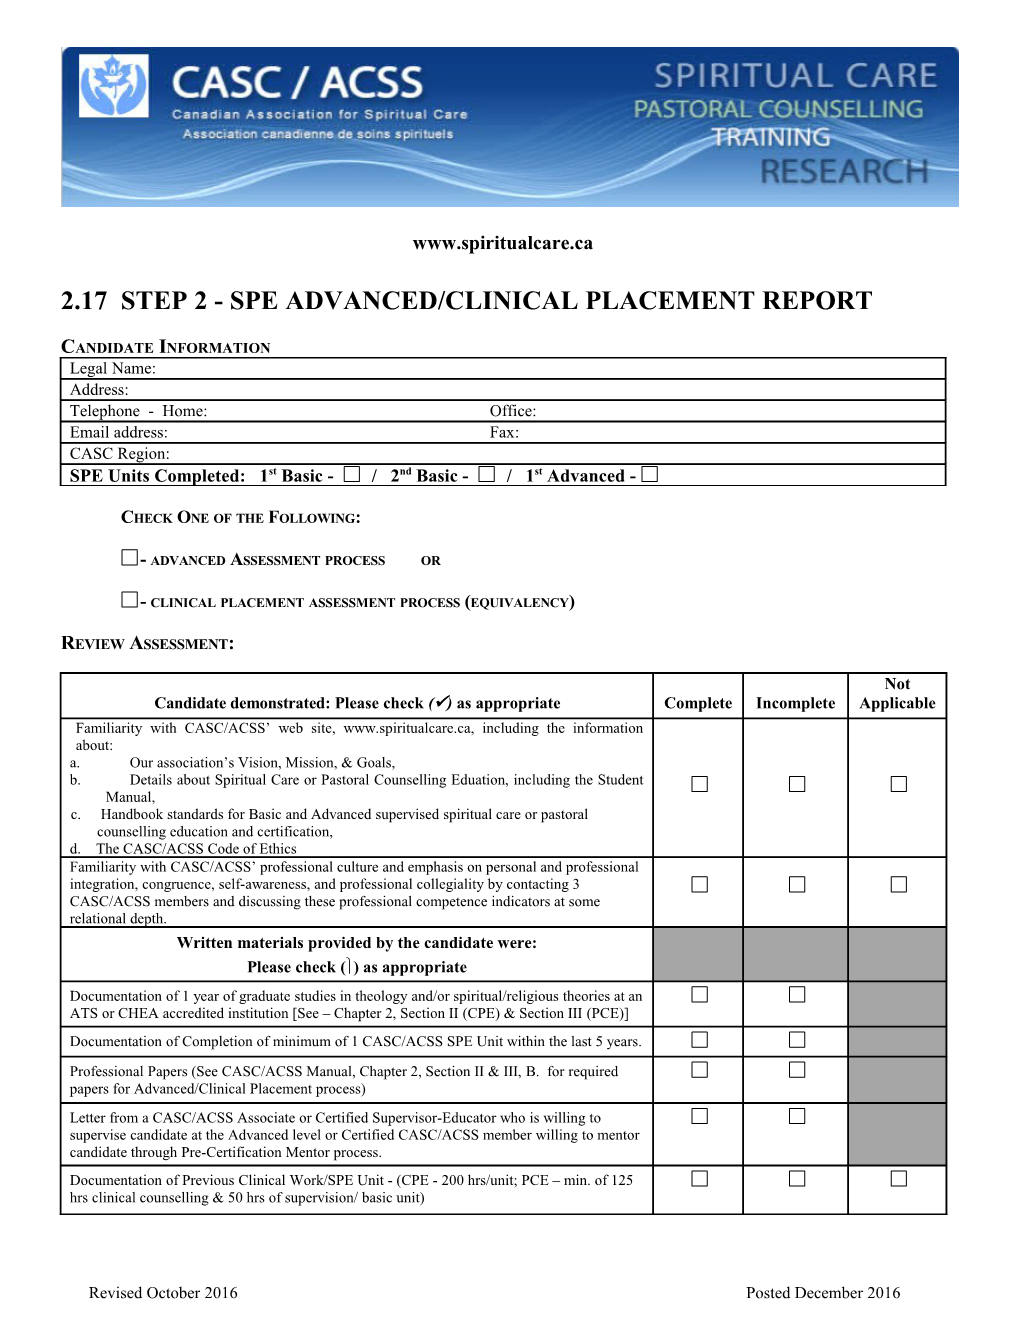 2.17Step 2 - Spe Advanced/Clinical Placement Report